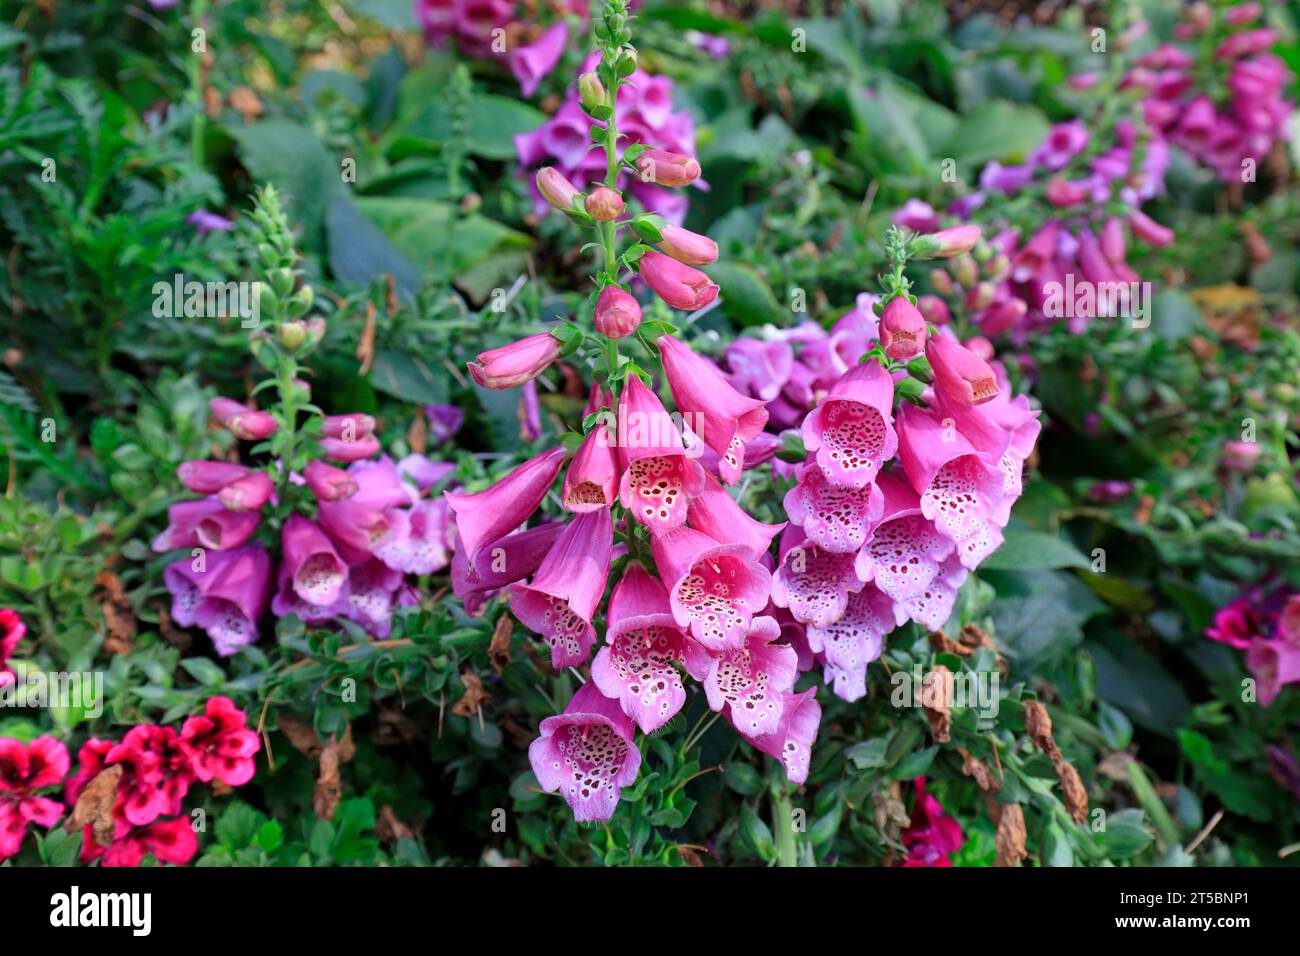 flower of the herb Rehmannia Stock Photo